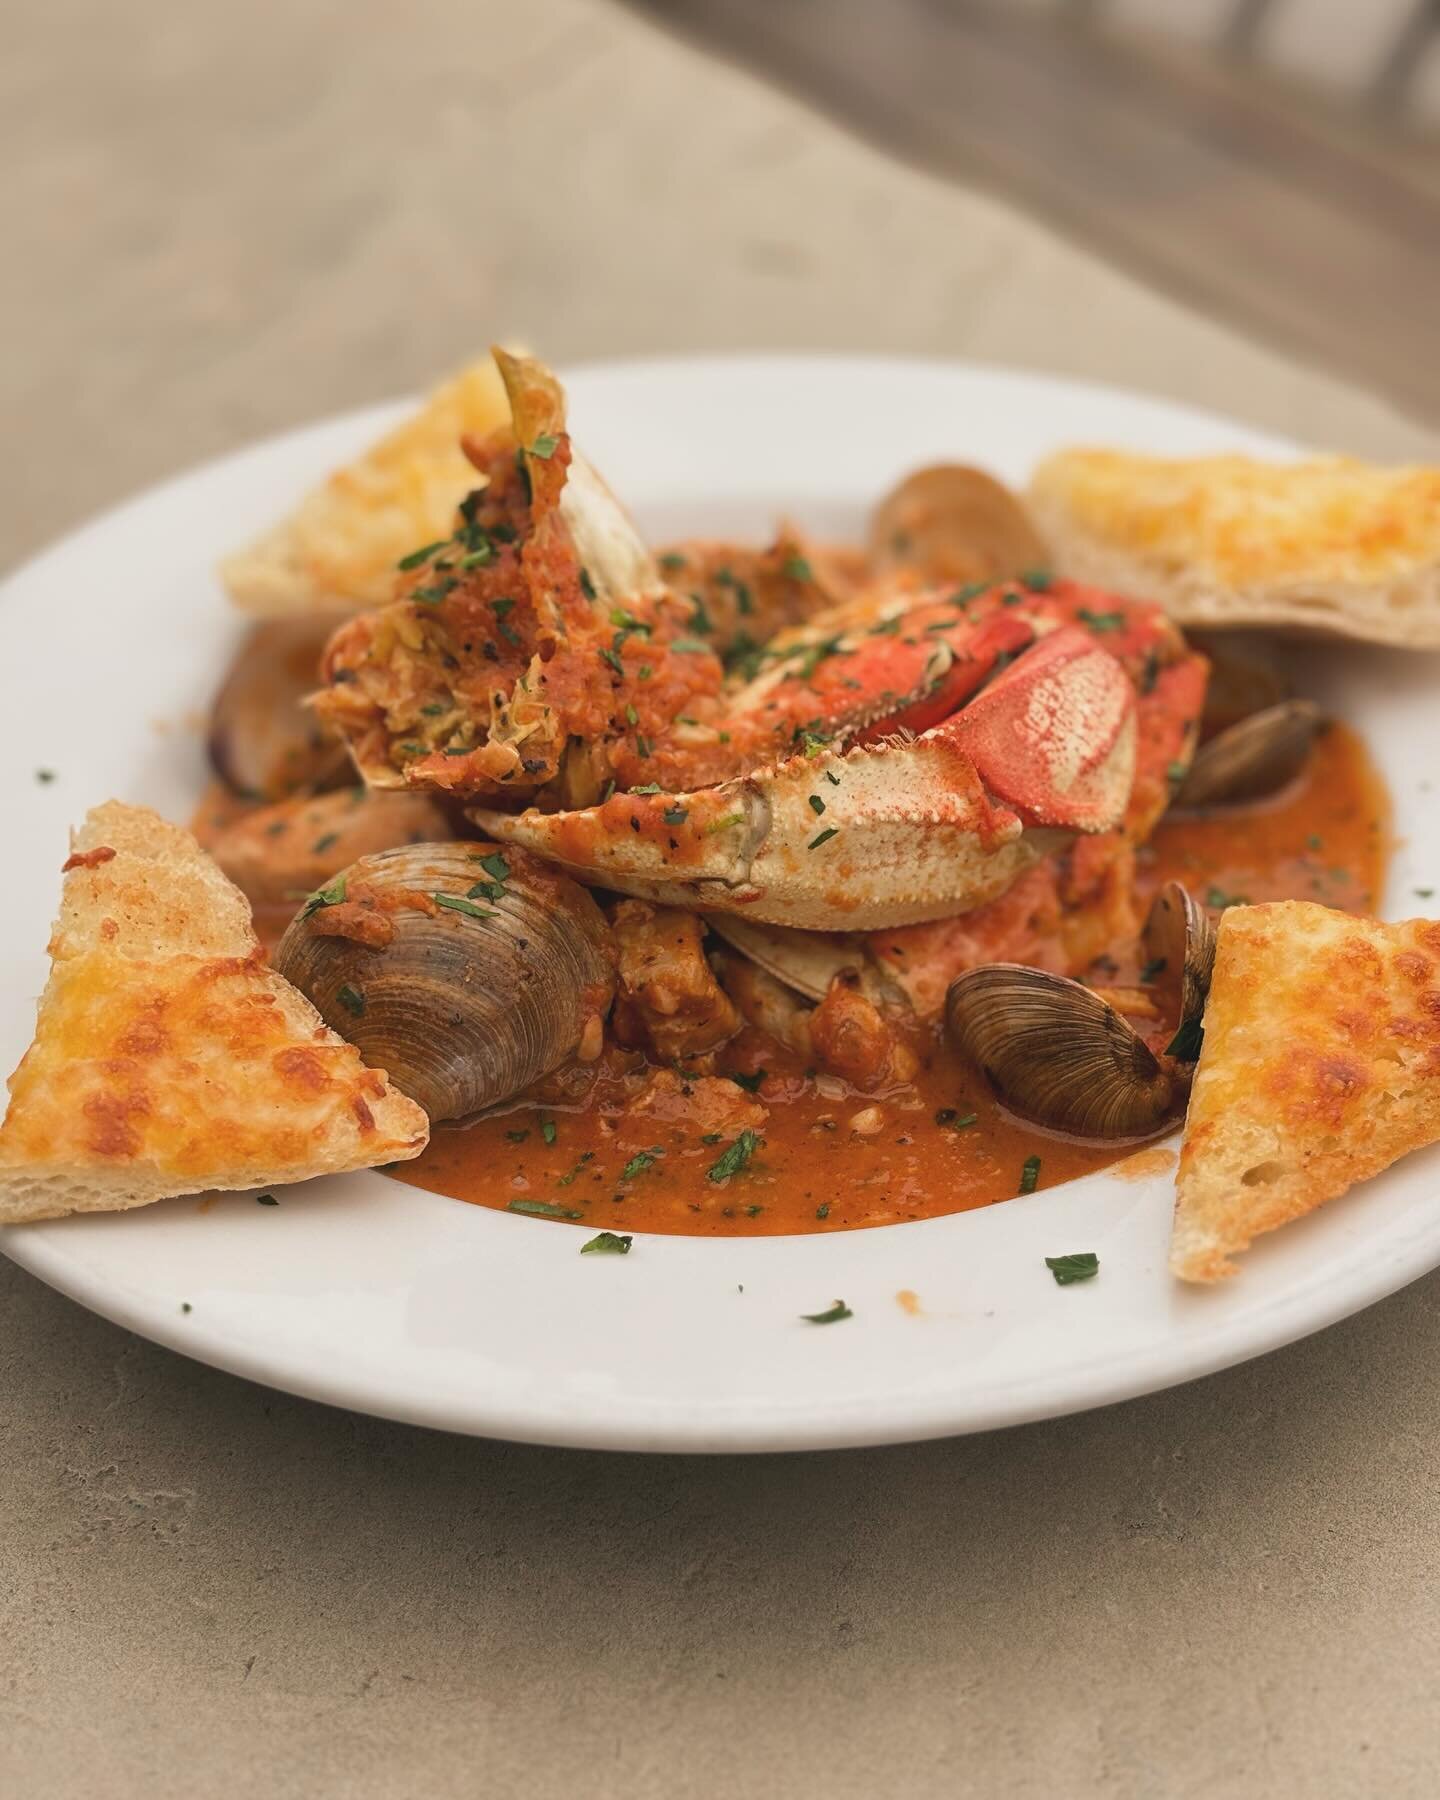 Did you know?! Thursday is Cioppino day! 🦀 Fresh Dungeness crab, prawns, clams, mussels &amp; white fish in our hearty tomato broth $29.95  #paradisebeachcapitola #cioppino #specialoftheday #capitolavillage